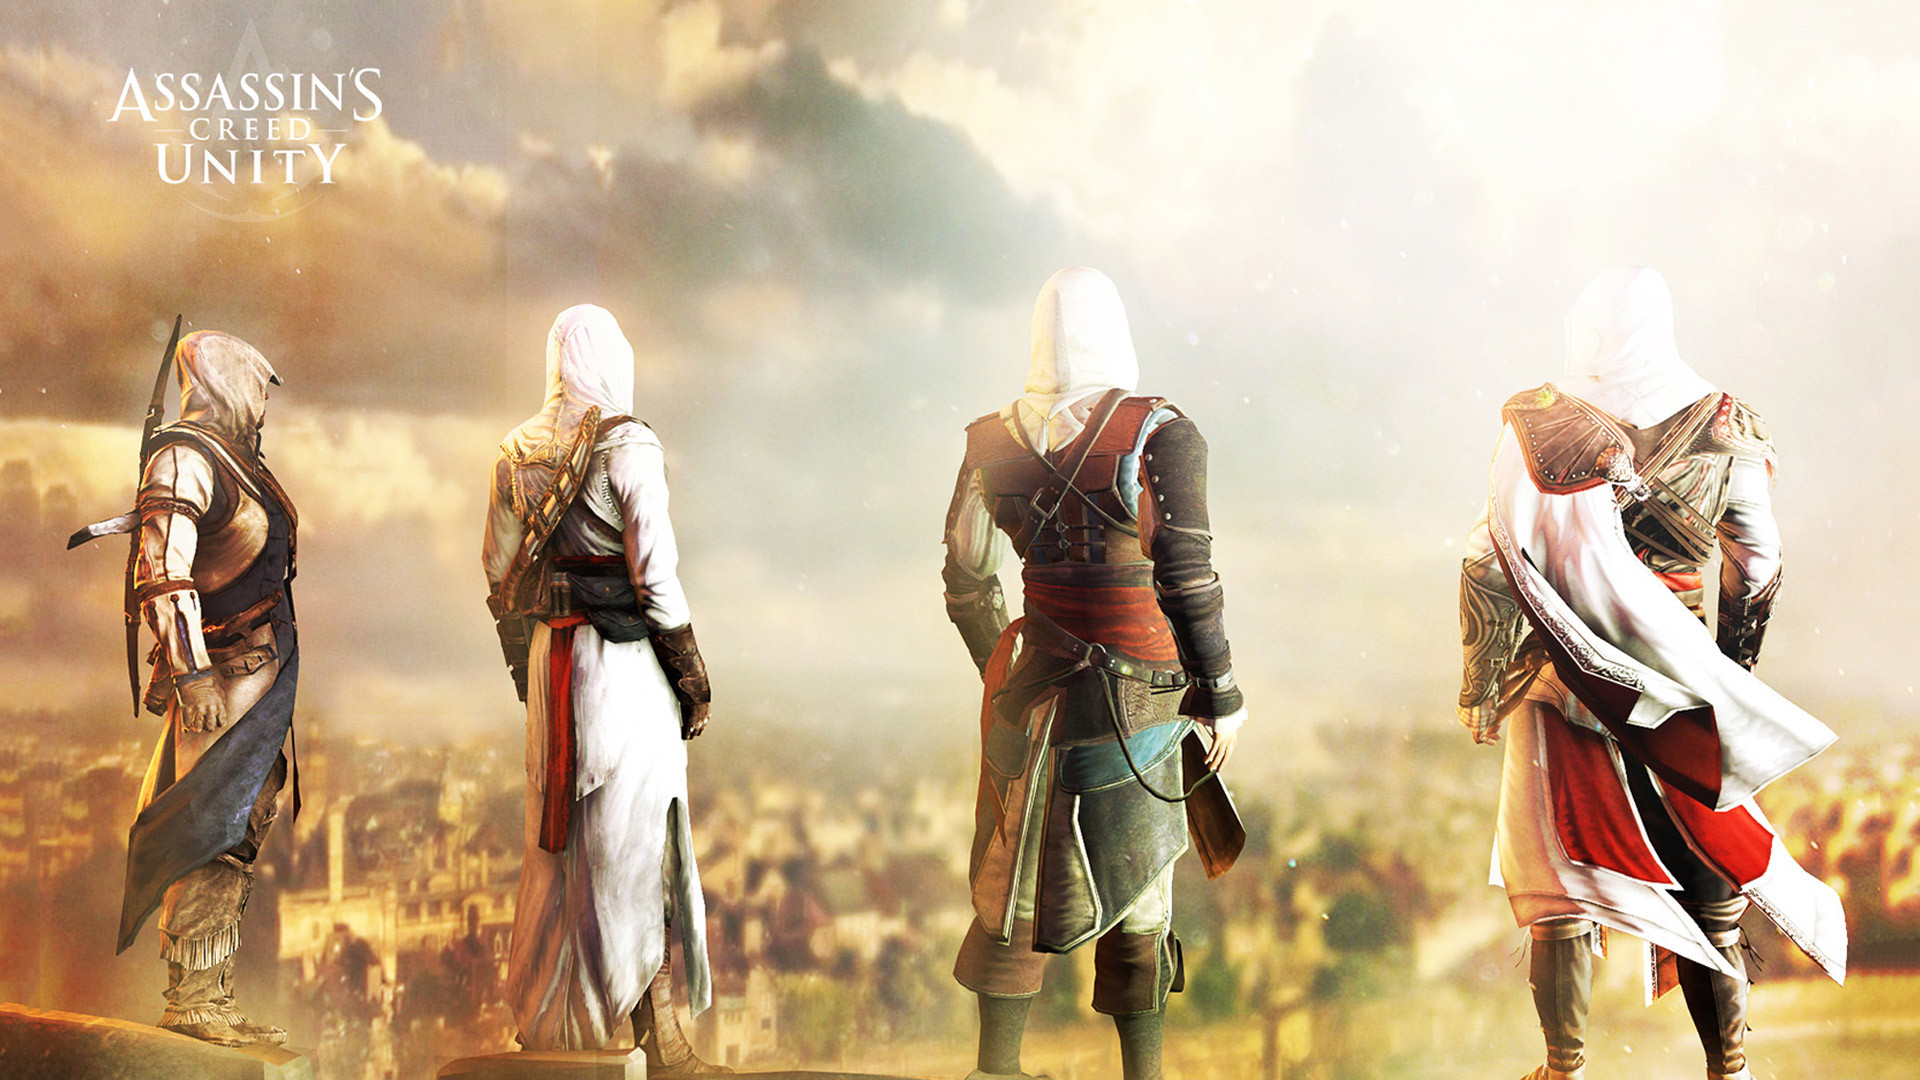 1920x1080 Free Assassin's Creed: Unity Wallpaper in 